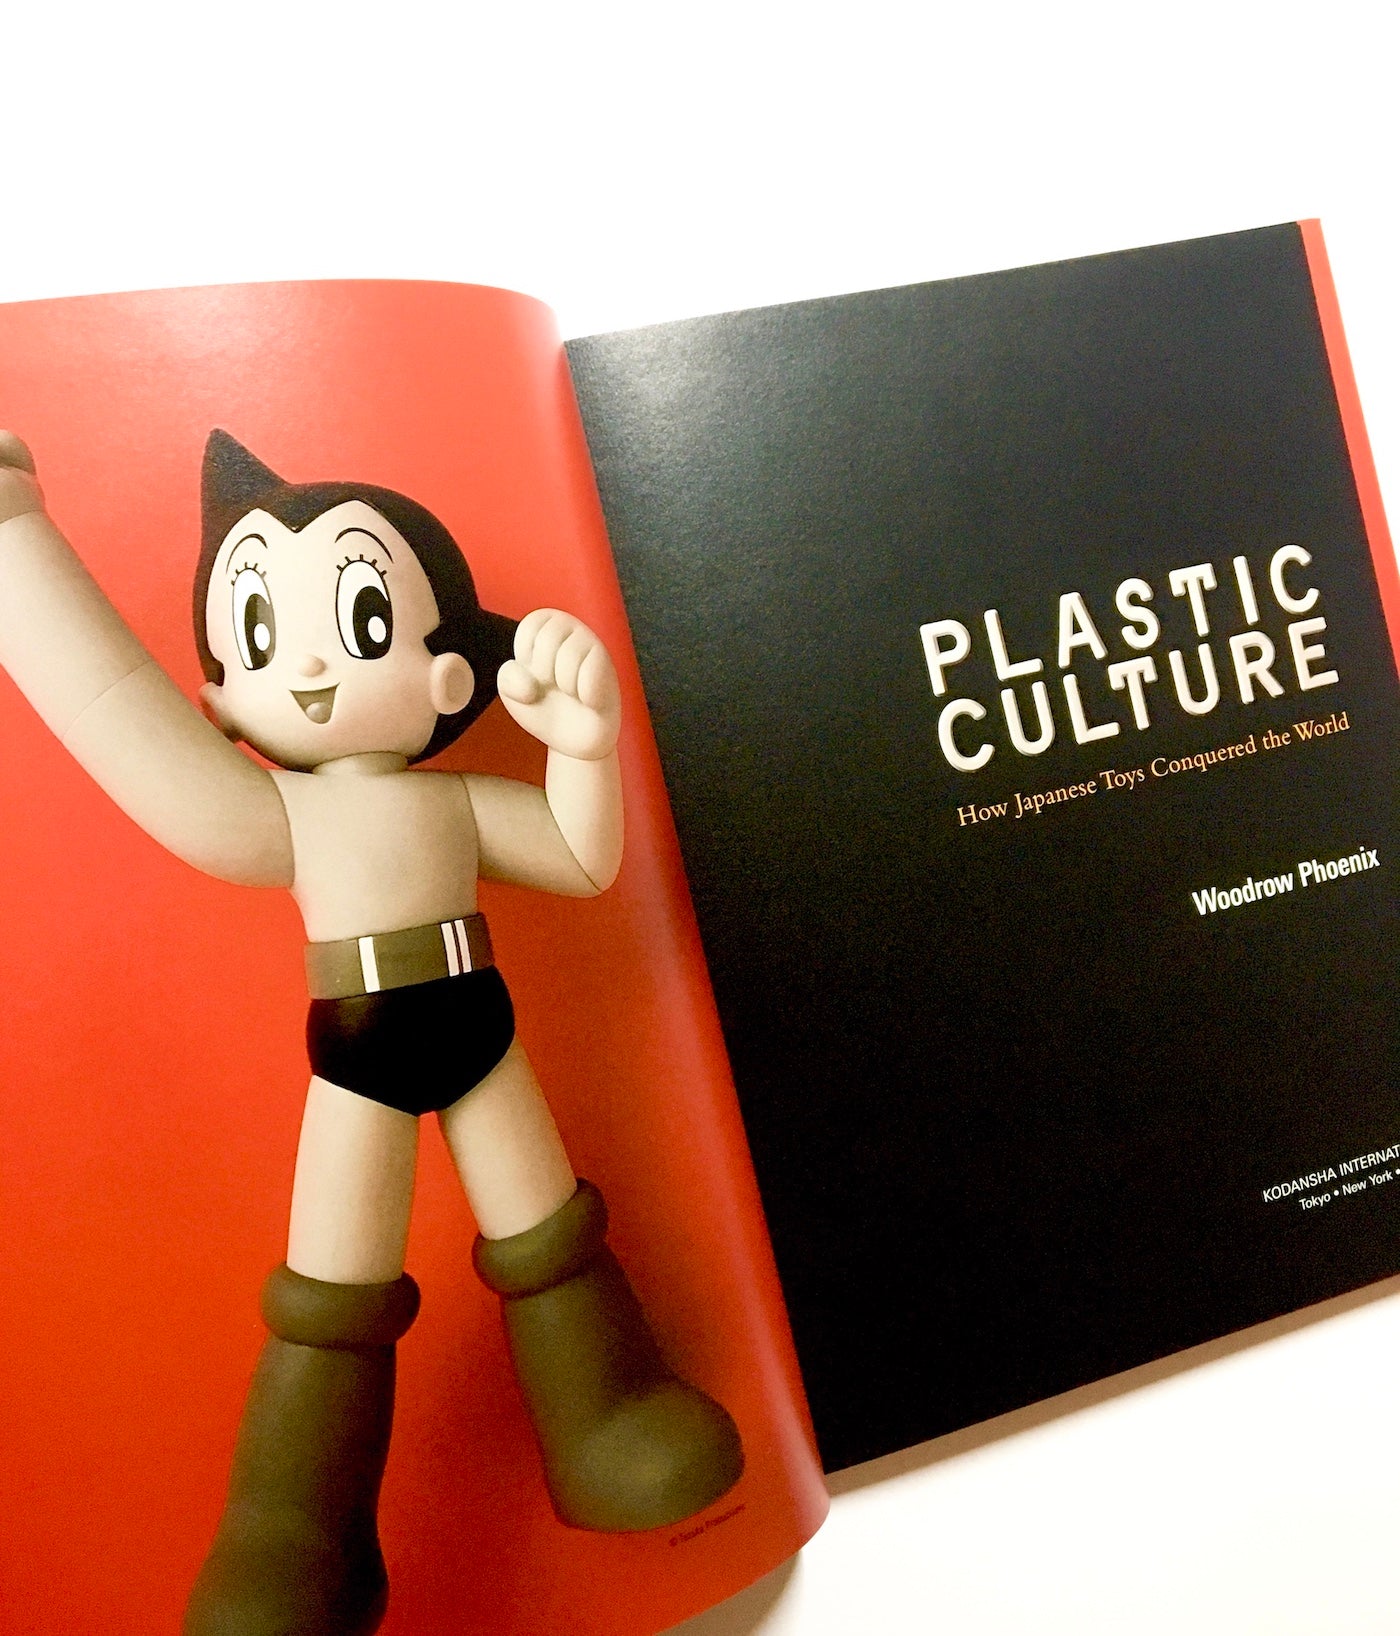 Plastic Culture: How Japanese Toys Conquered the World